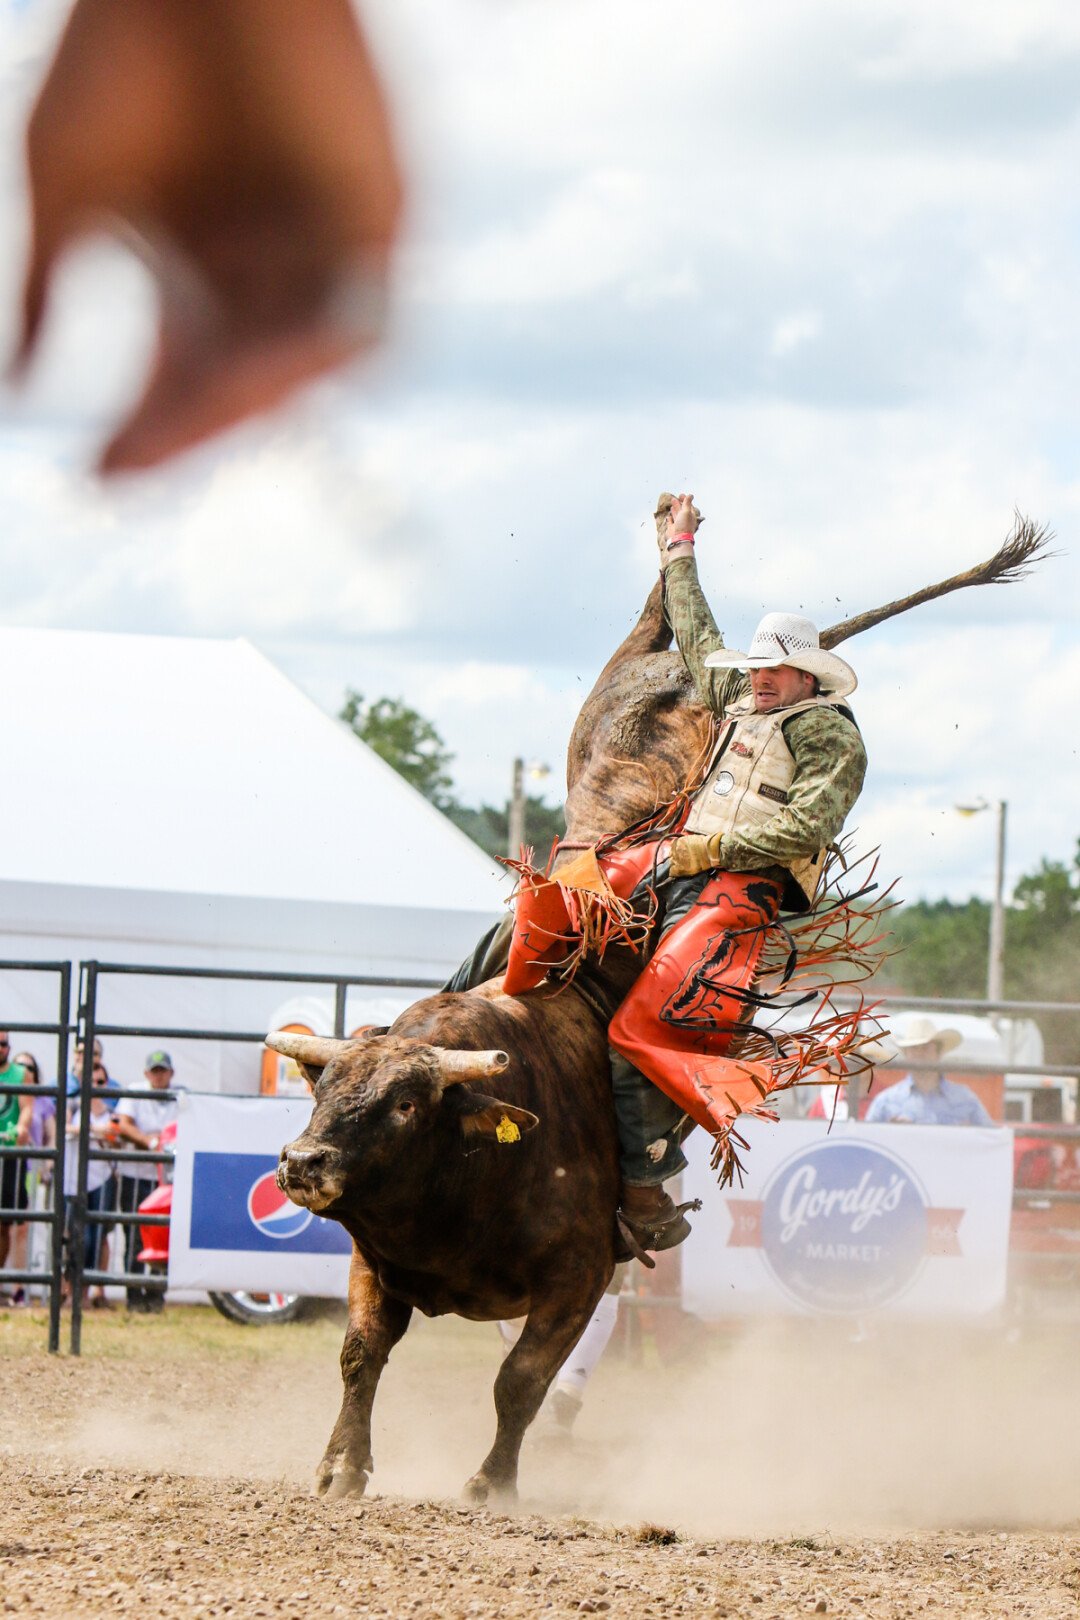 He’s really bulling his OWN weight. Rodeo style competitions were a big part of this year’s Northern Wiscosnin State Fair, held on the fairgrounds in Chippewa Falls July 13-17.